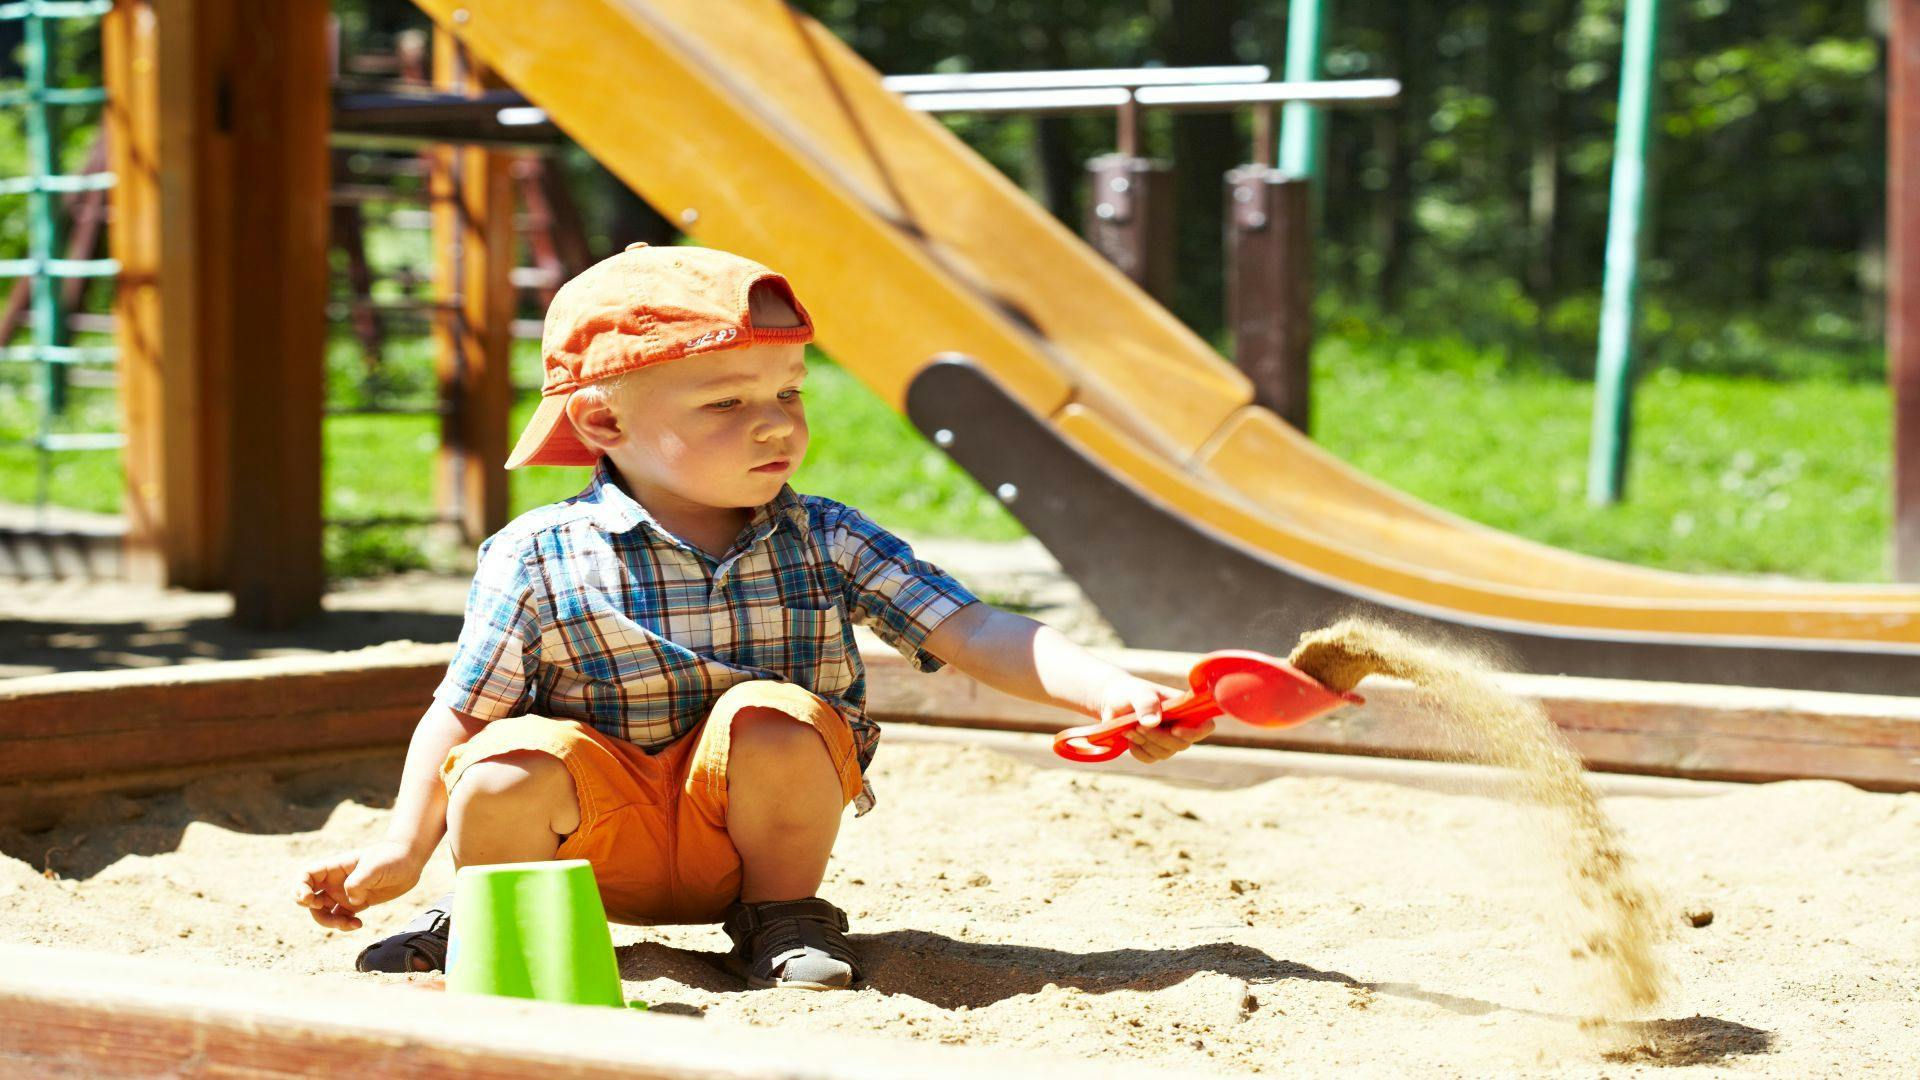 Sand in Public Playgrounds May Play a Role in Transmitting Infections